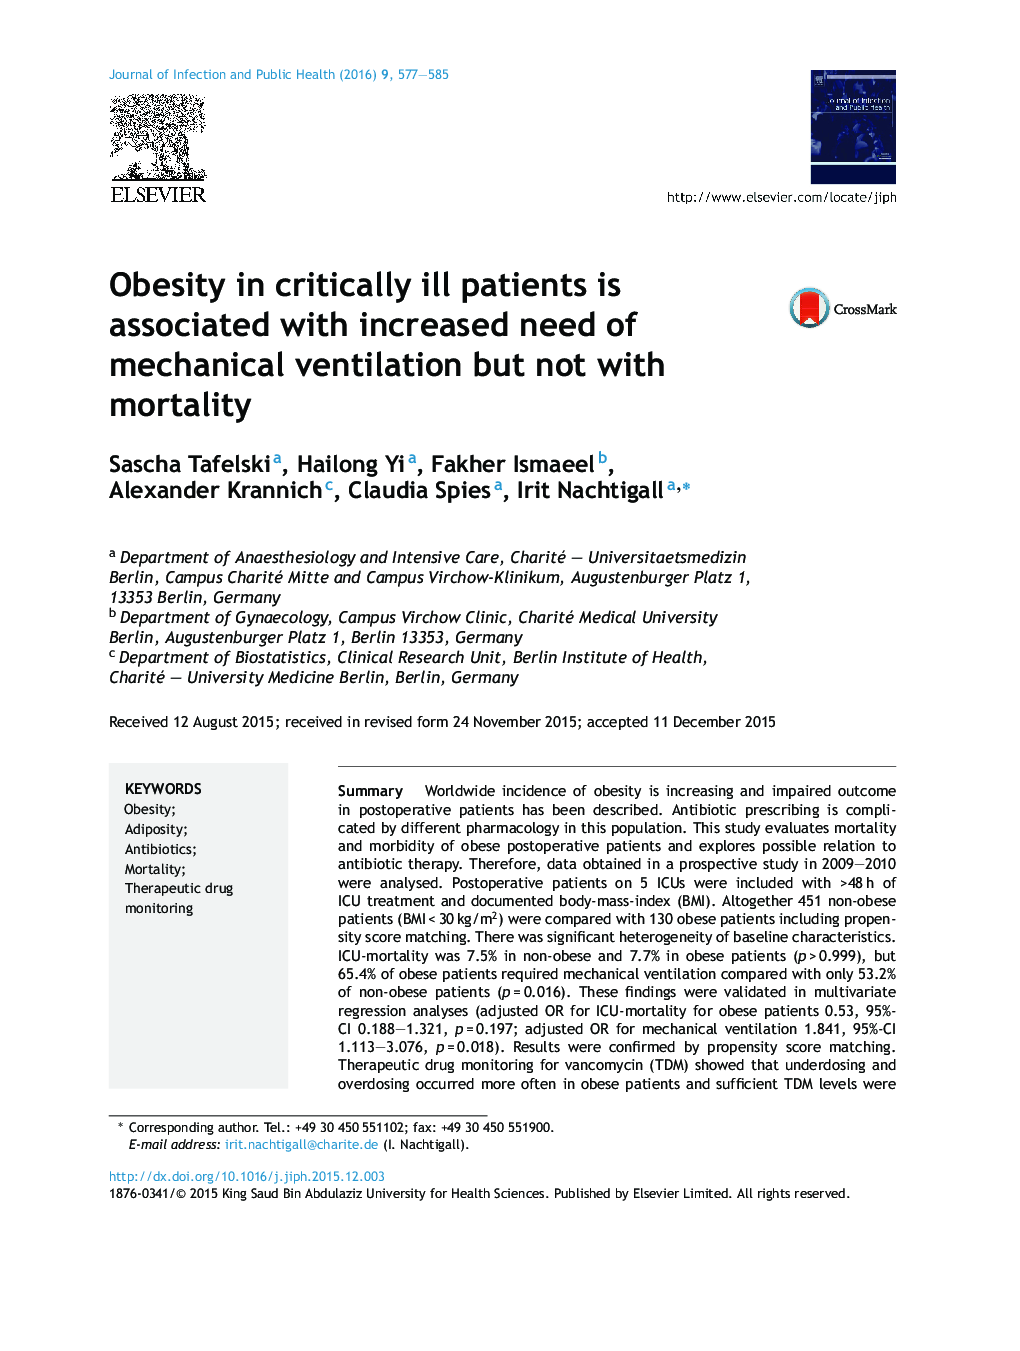 Obesity in critically ill patients is associated with increased need of mechanical ventilation but not with mortality